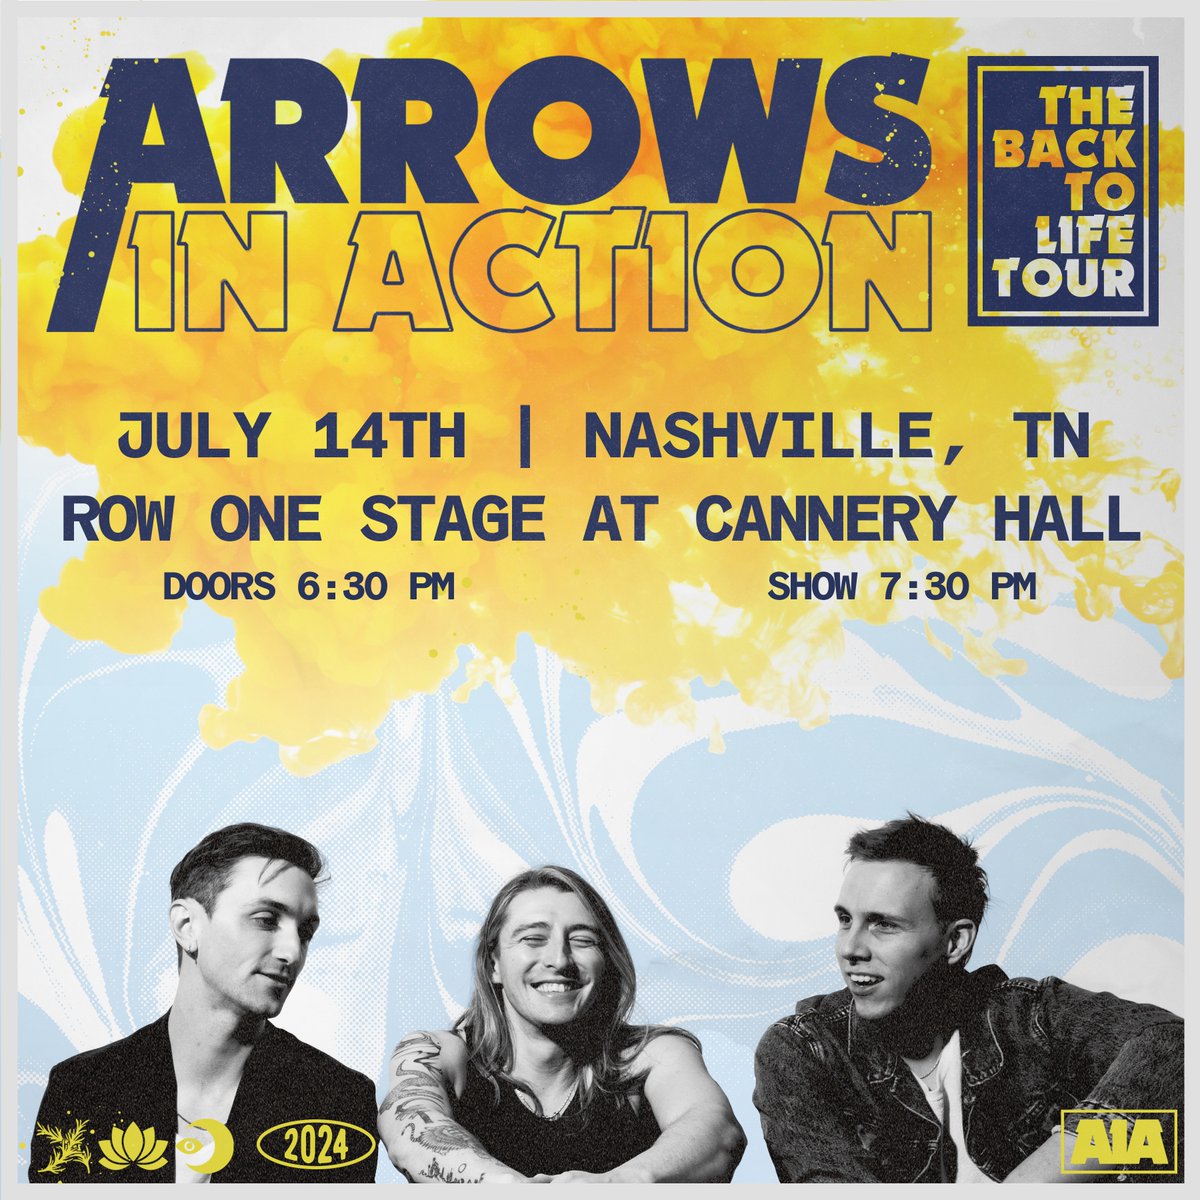 'These will be our biggest, wildest, most unhinged yet wholesome, Arrows in Action-est headlining shows of our career so far and we CANNOT WAIT!' Take it from @ArrowsInAction themselves, you HAVE to see them at Cannery Hall on July 14th!💥 Tickets on sale Friday at 11PM CT!🎟️